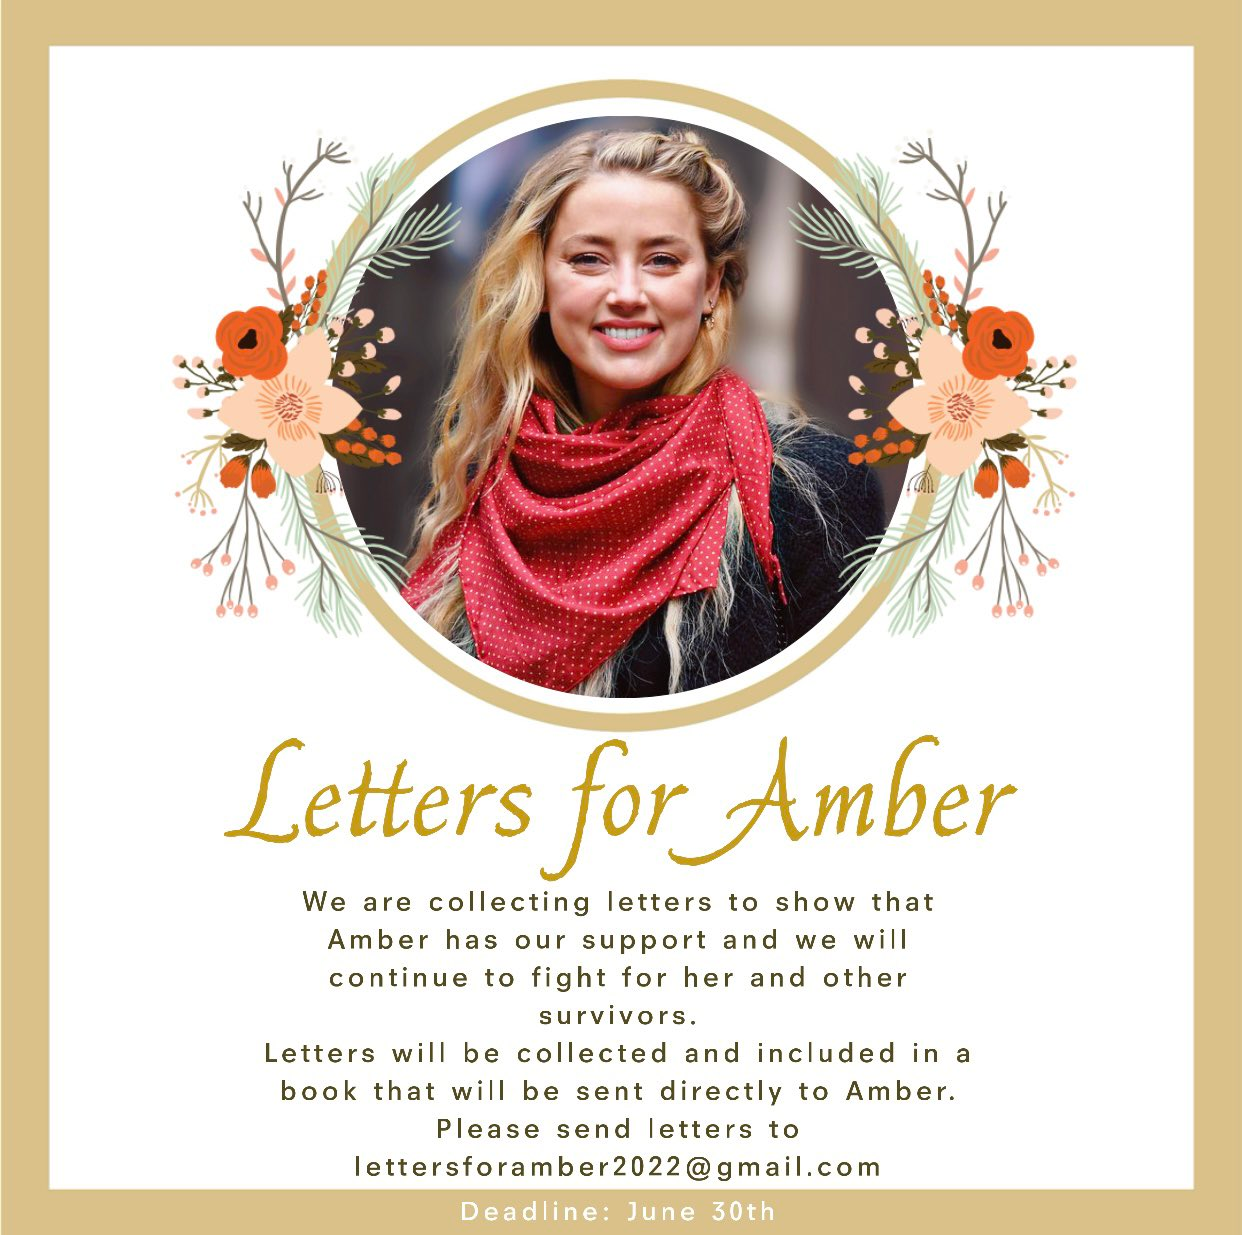 Letters for Amber Campaign - Deadline is June 30, 2022